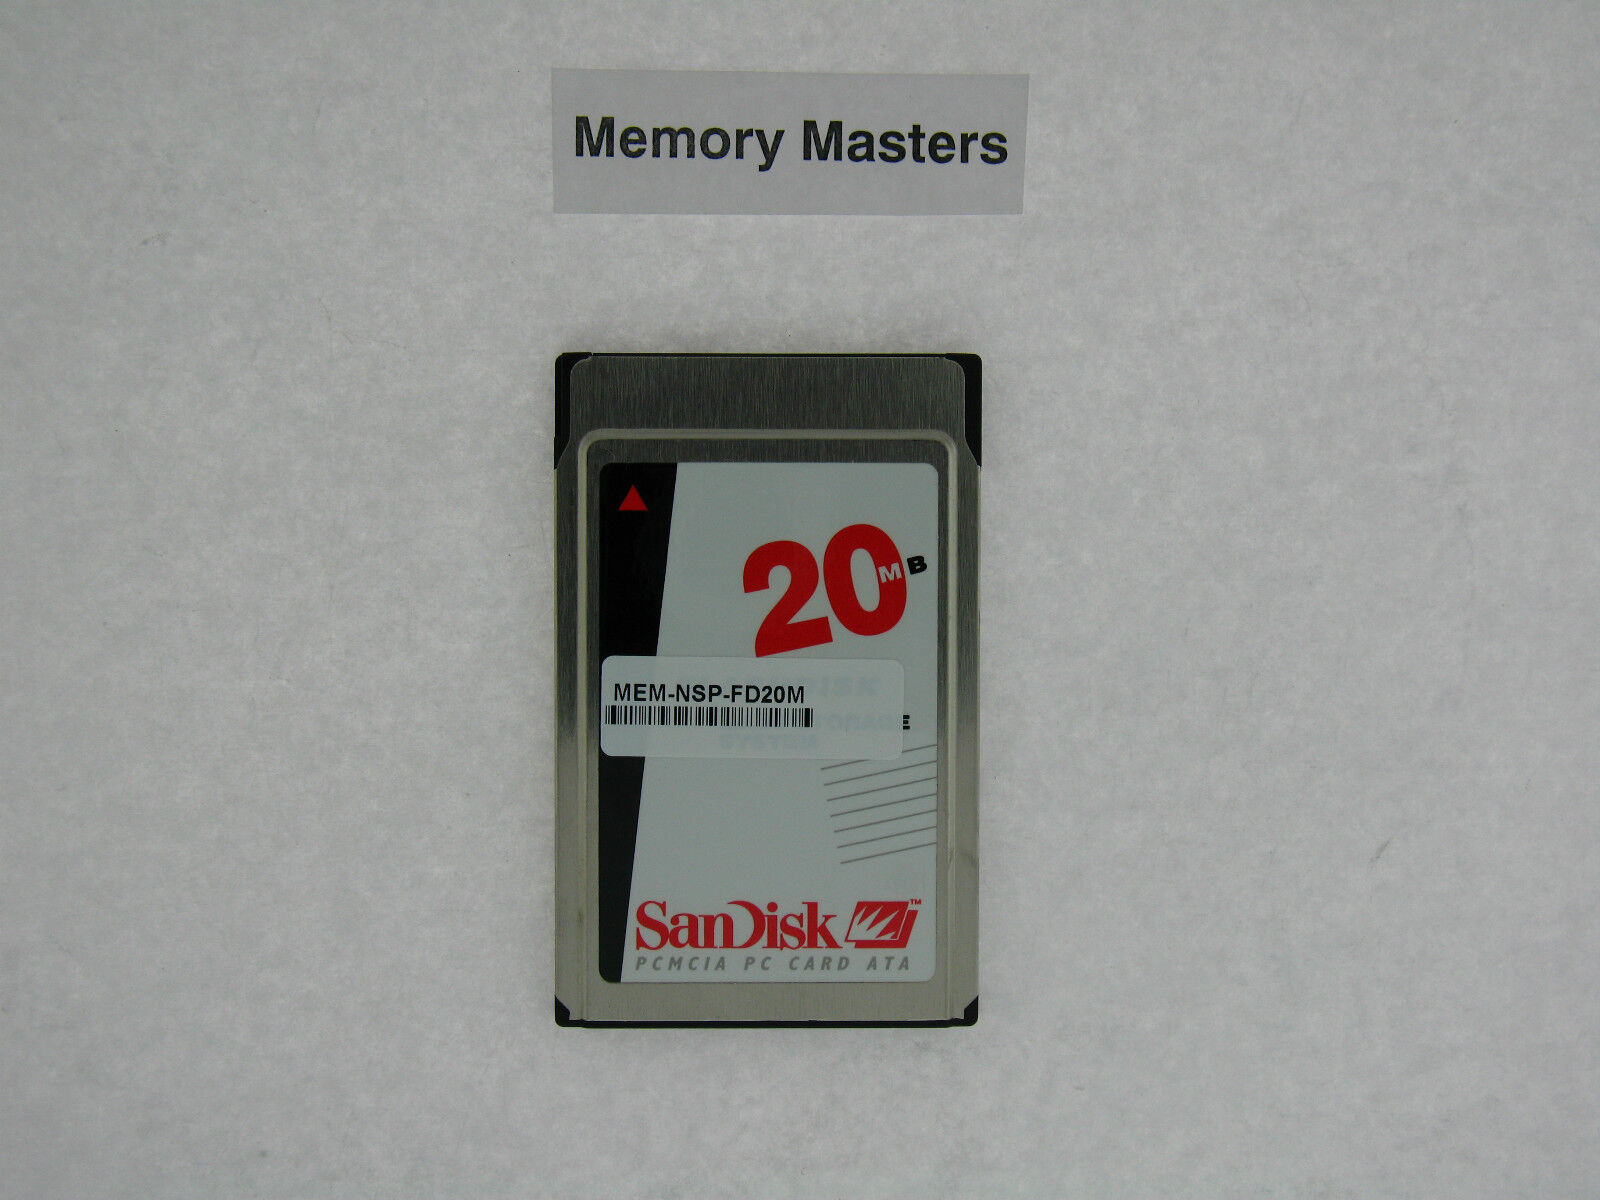 MEM-NSP-FD20M 20MB Approved PCMCIA ATA Flash 6400 Cisco Disk 5 ☆ very popular Max 62% OFF for